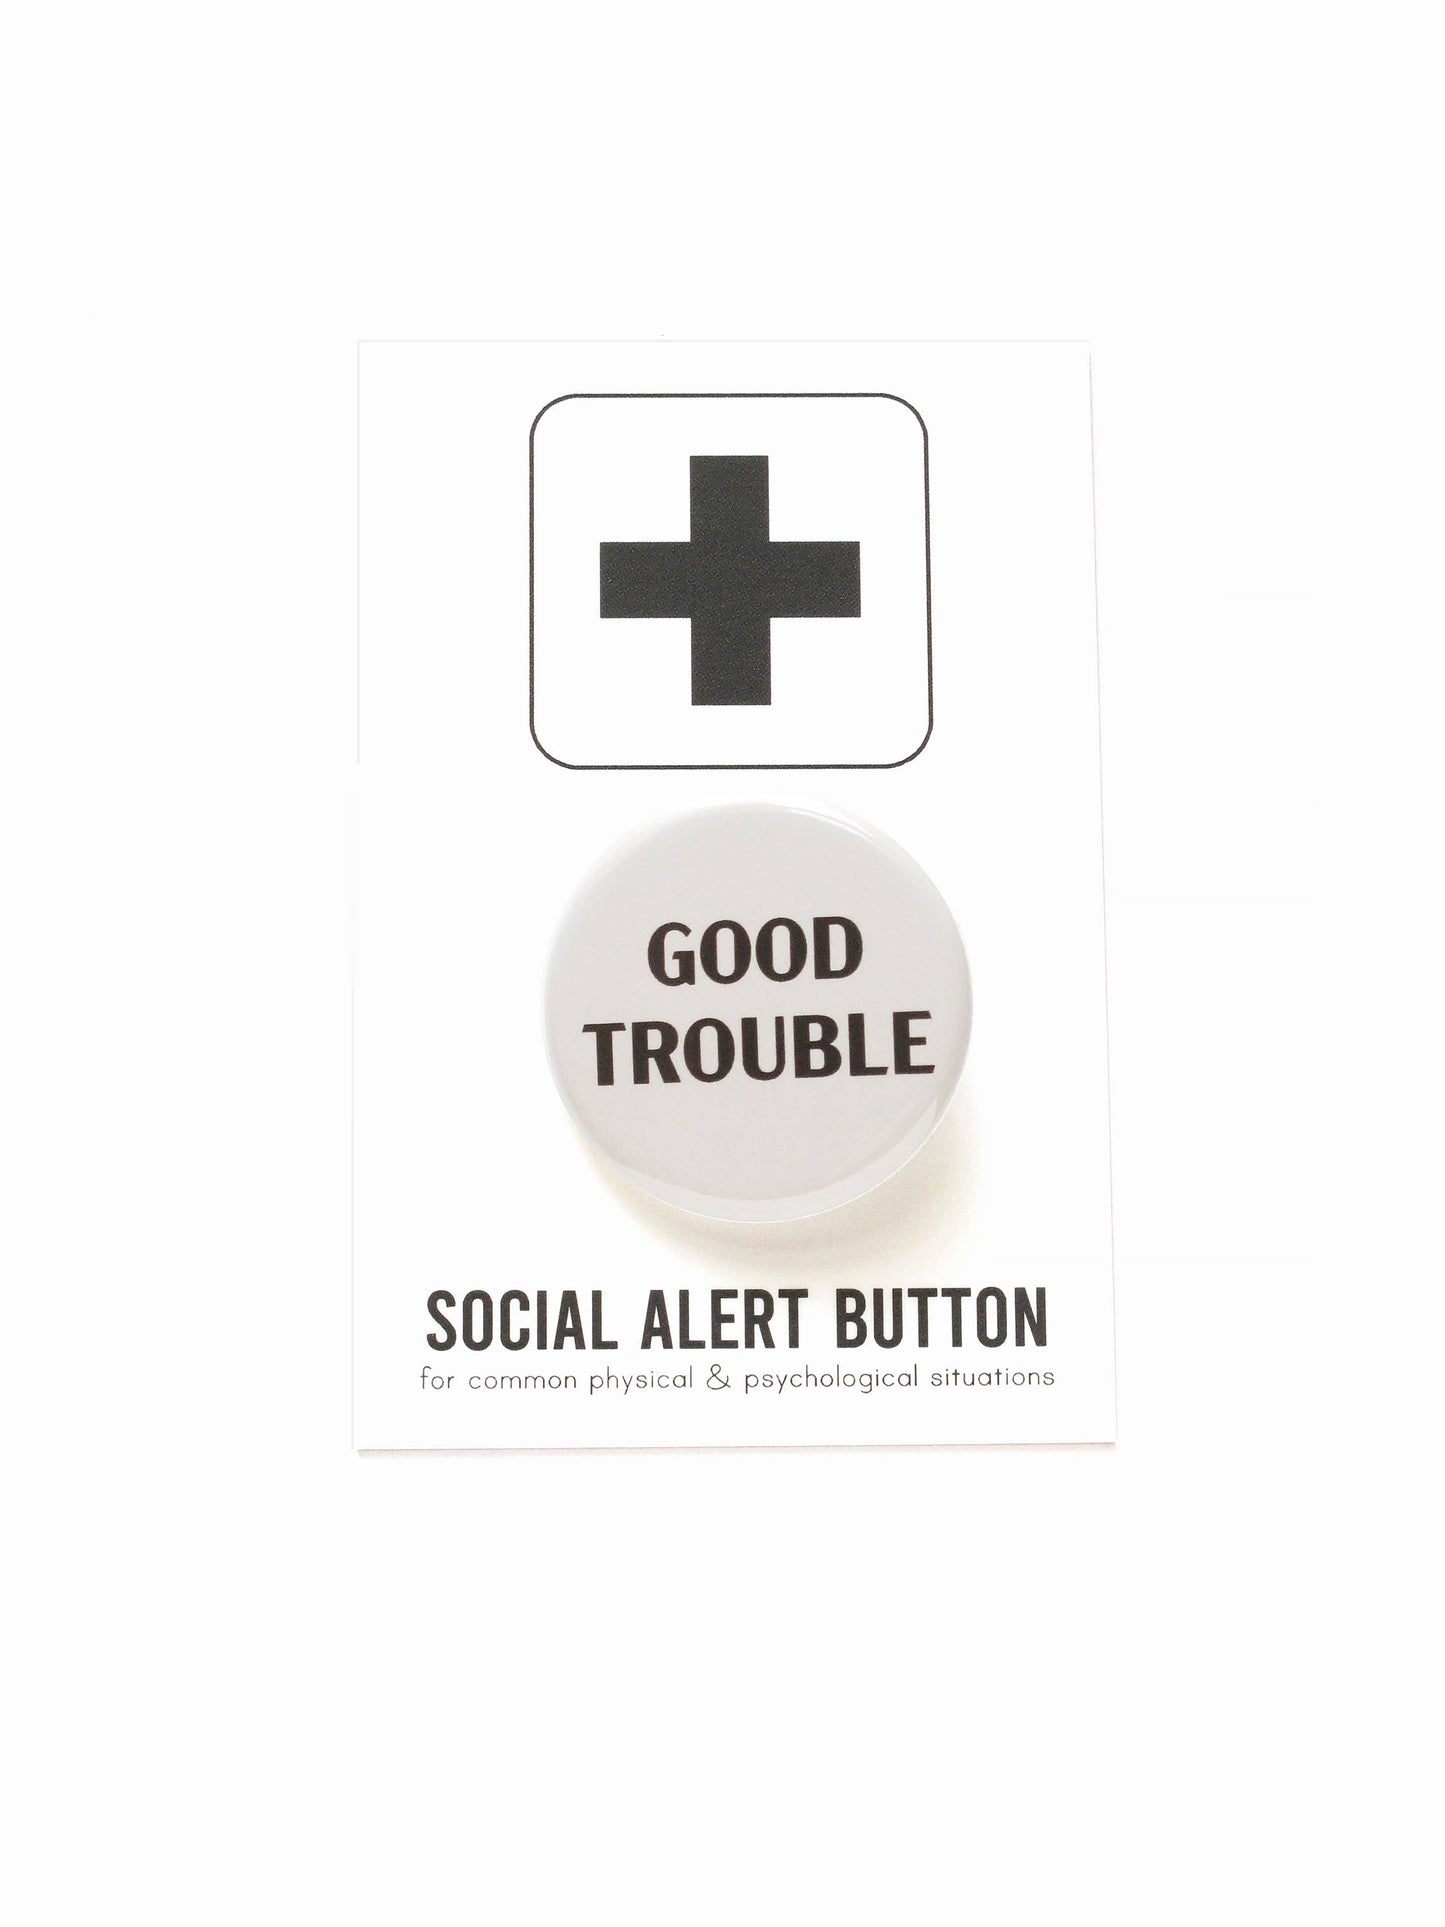 WORD FOR WORD Factory - GOOD TROUBLE John Lewis commemorative pinback button